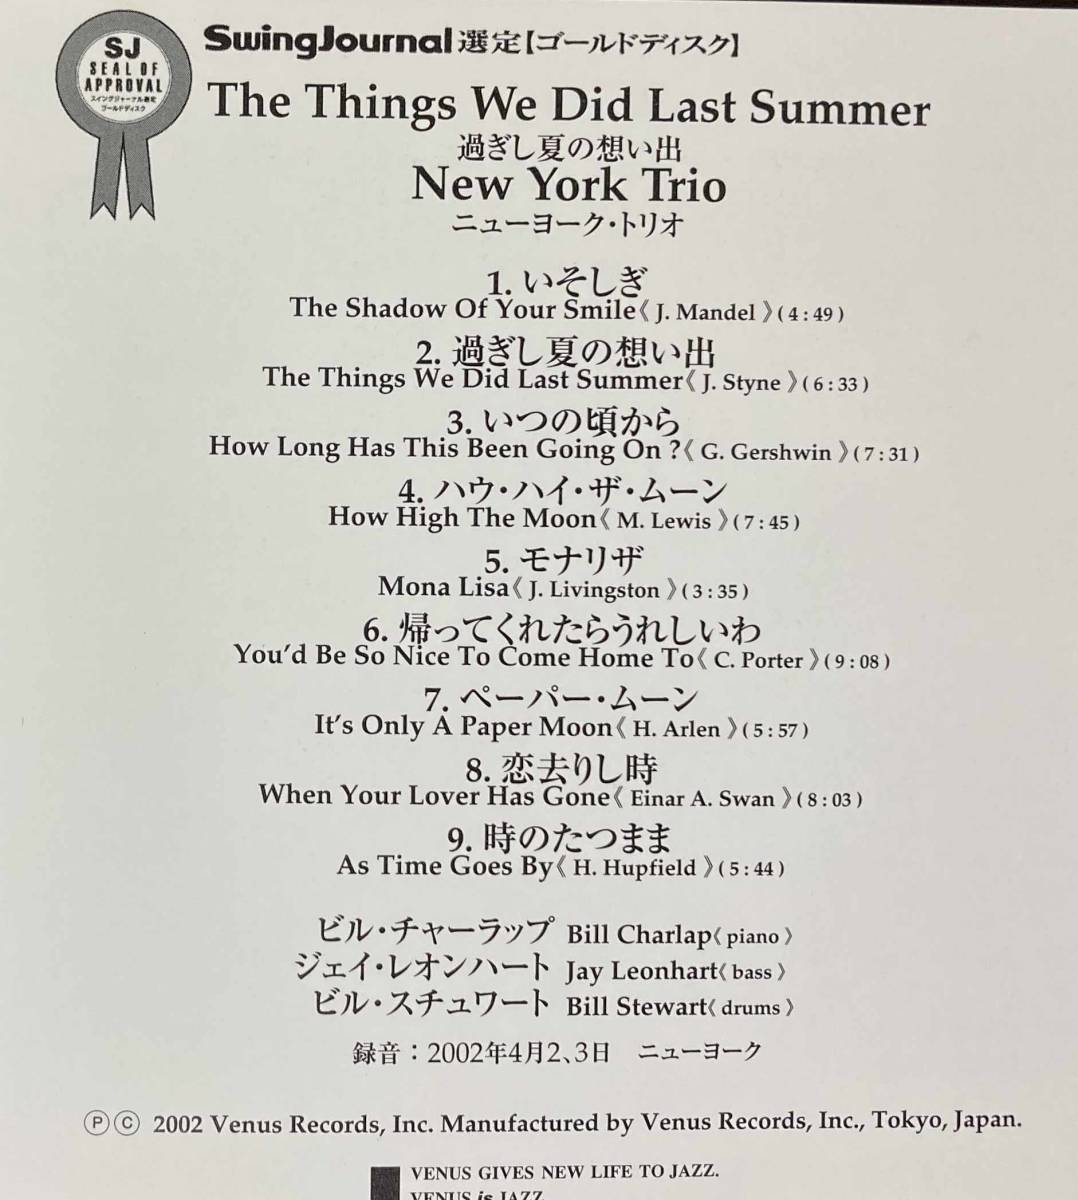  New York Trio / The Things We Did Last Summer 中古CD　国内盤　帯付き_画像5